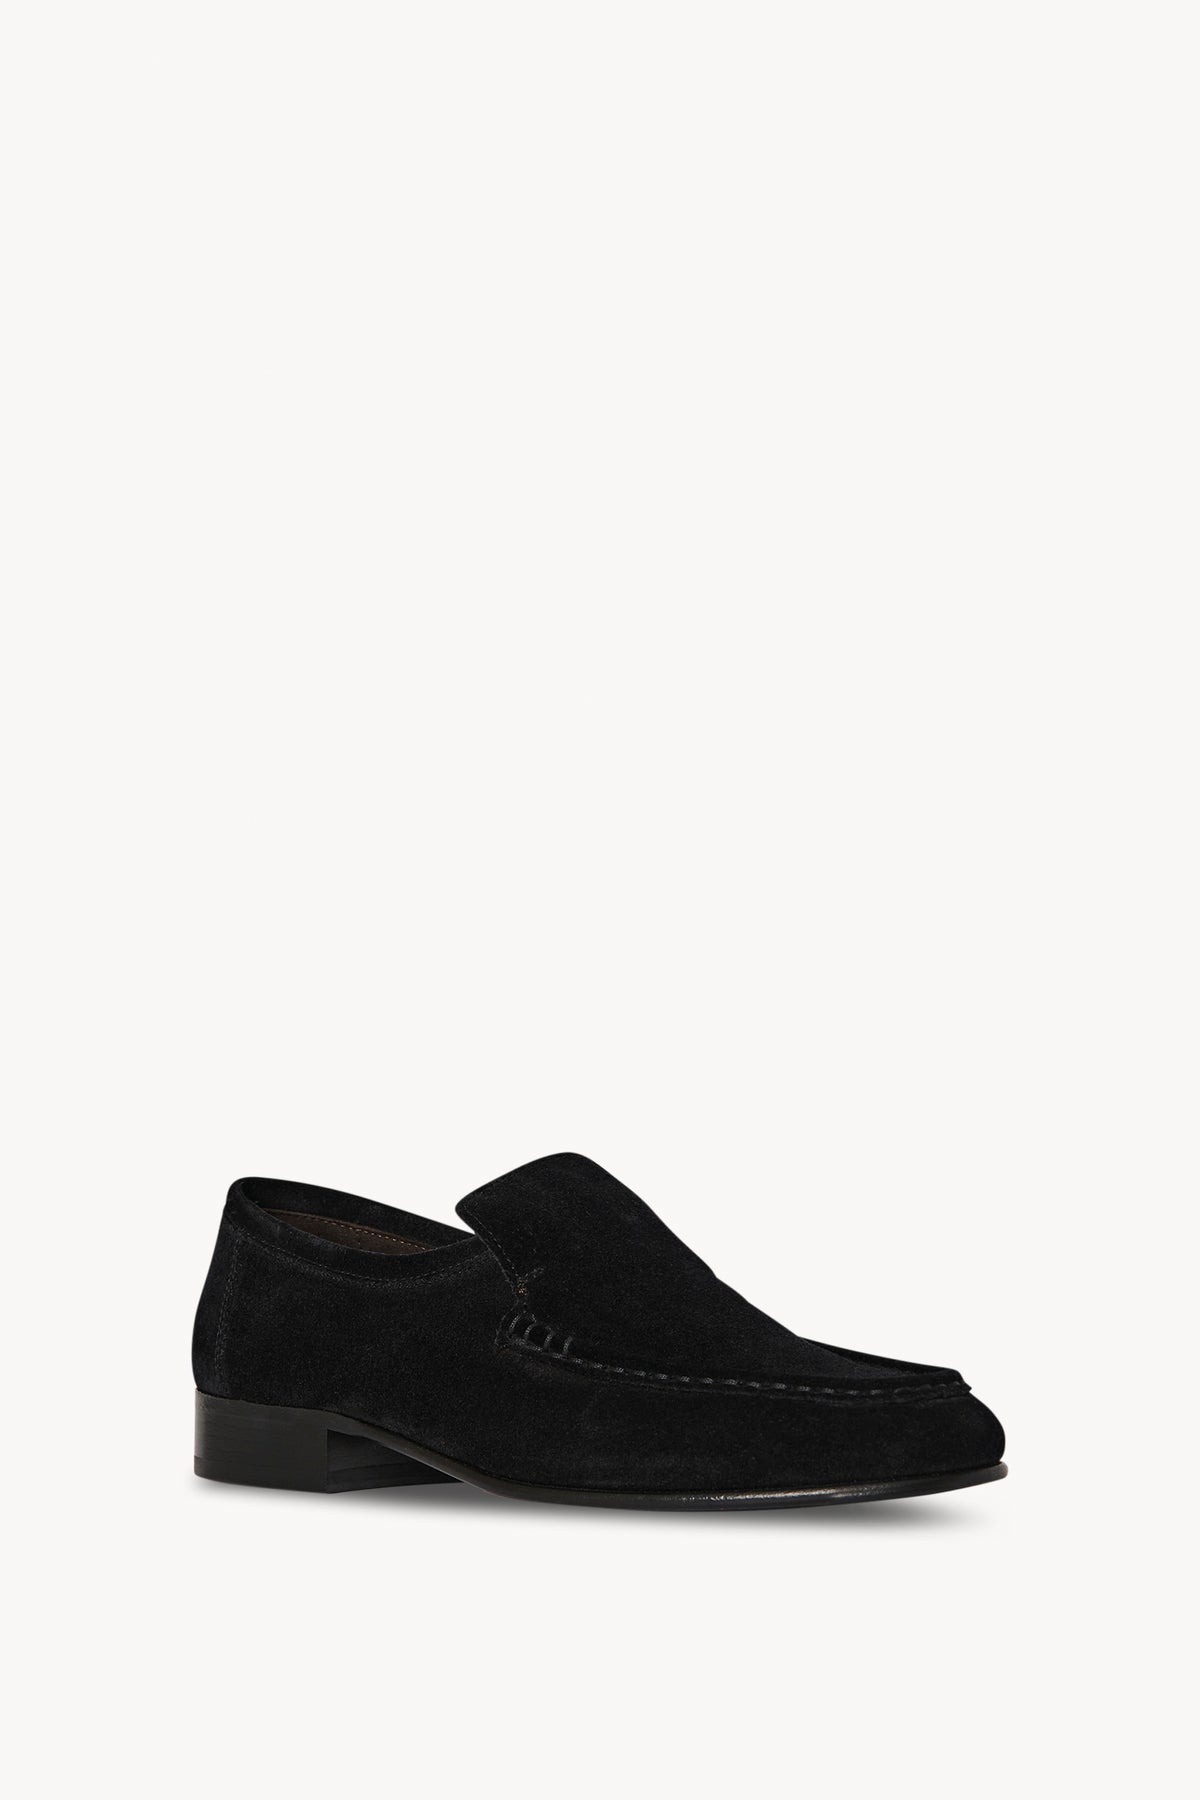 New Soft Loafer in Suede